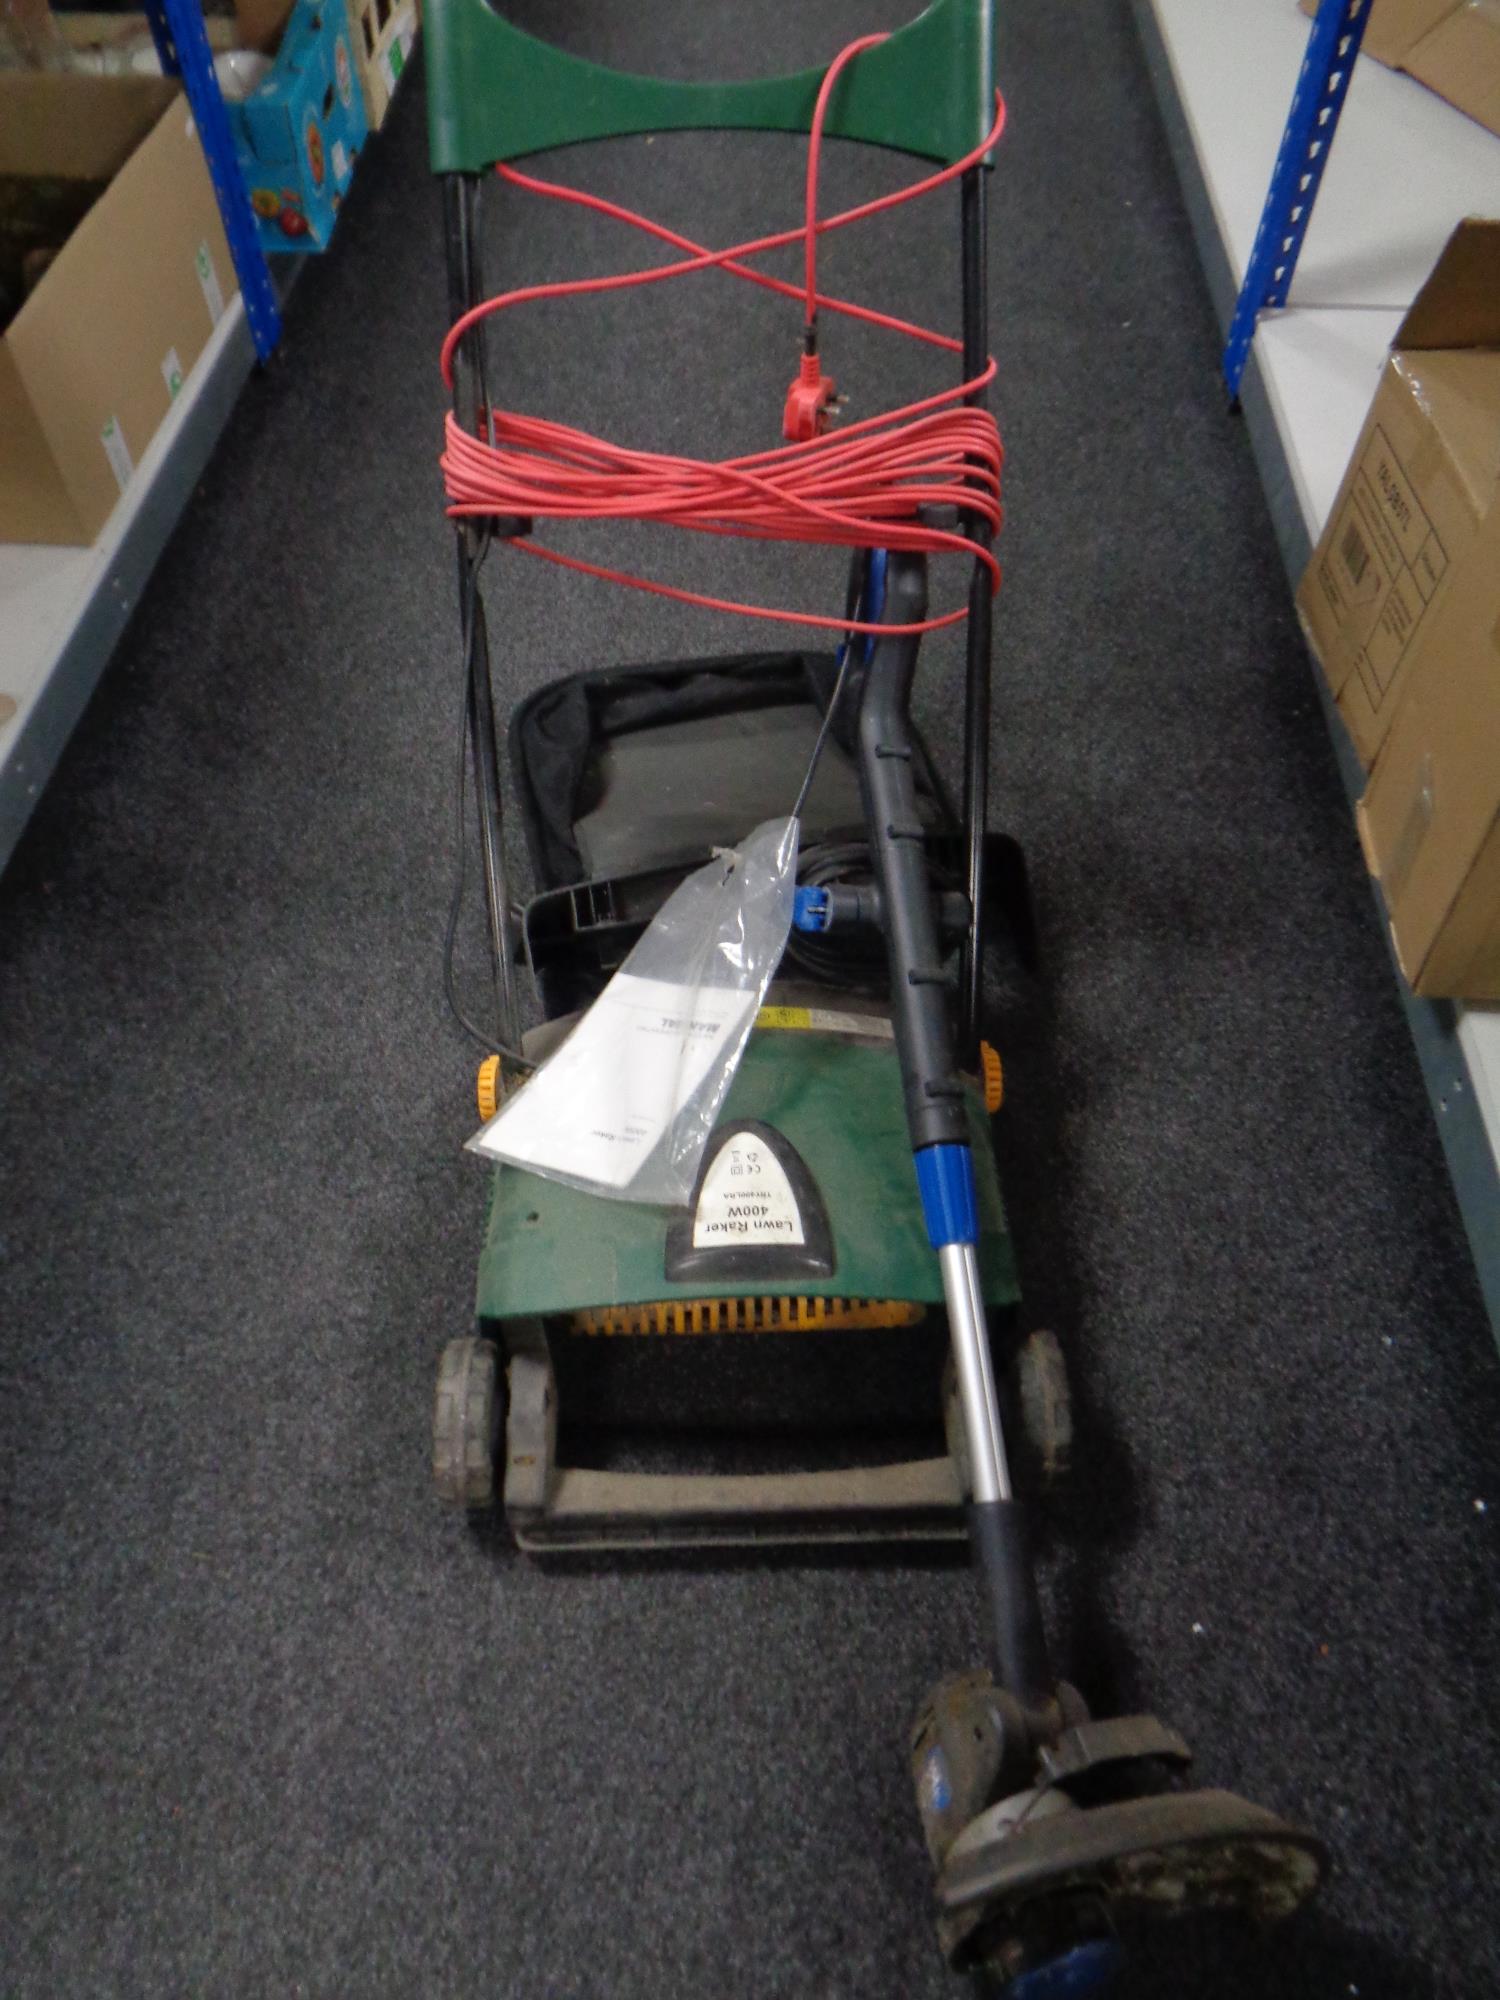 A 400w electric lawn raker and an electric strimmer